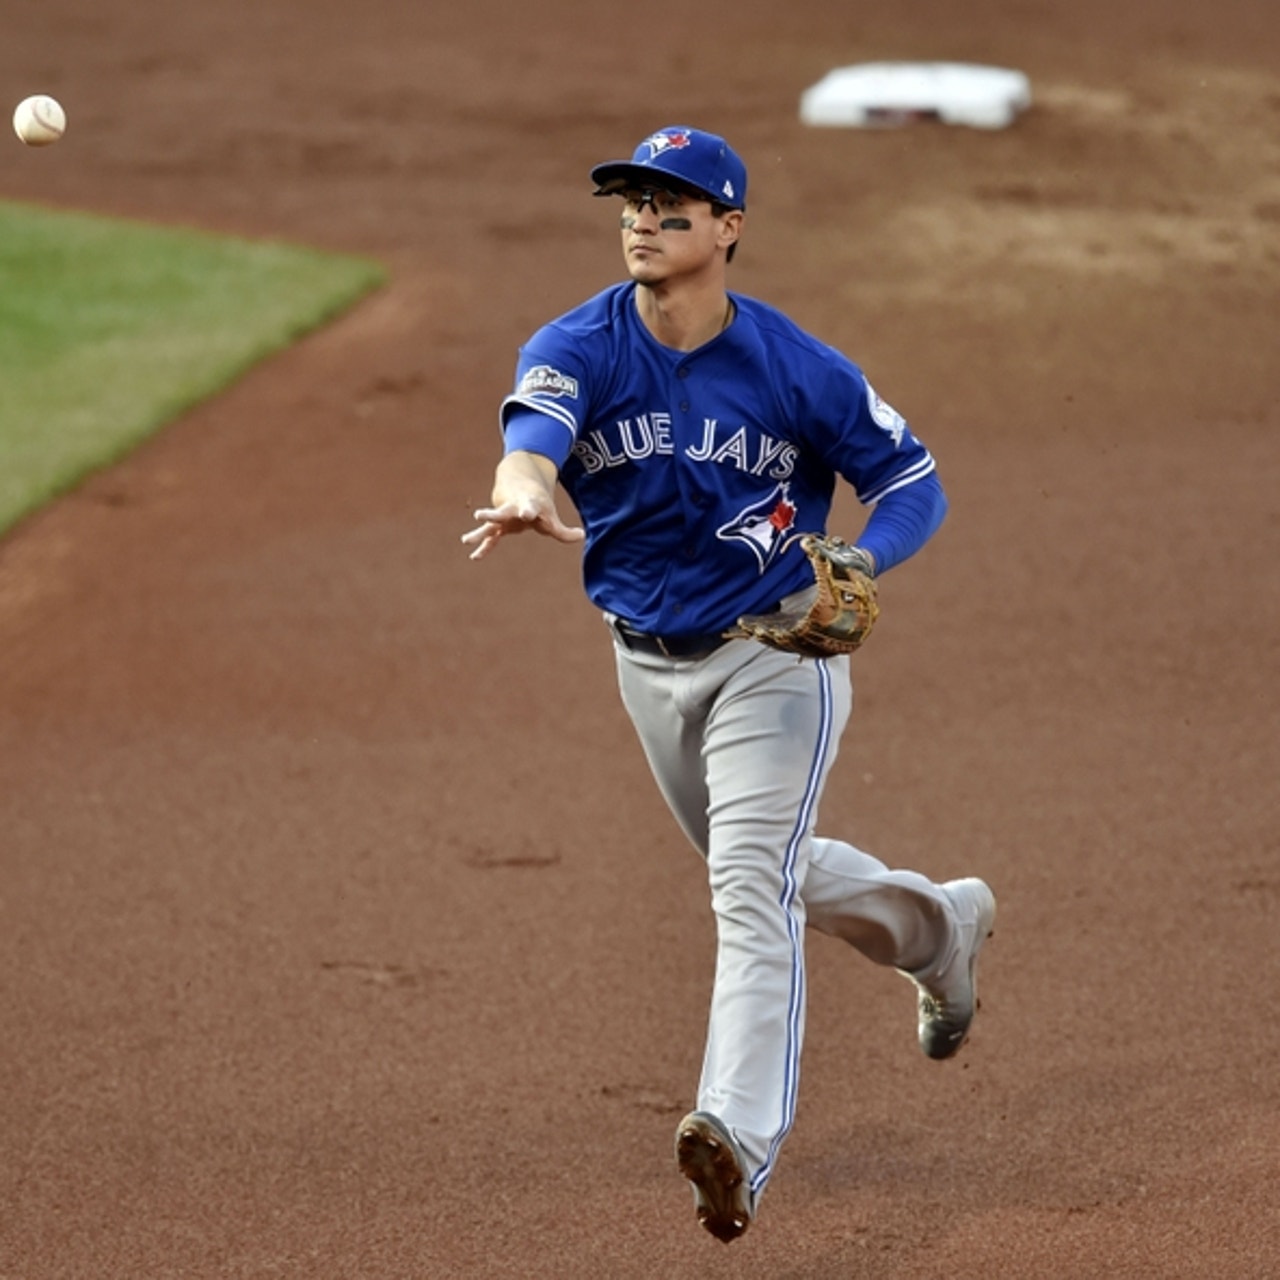 Report: Blue Jays, Barney settle at one year, $2.8875 million